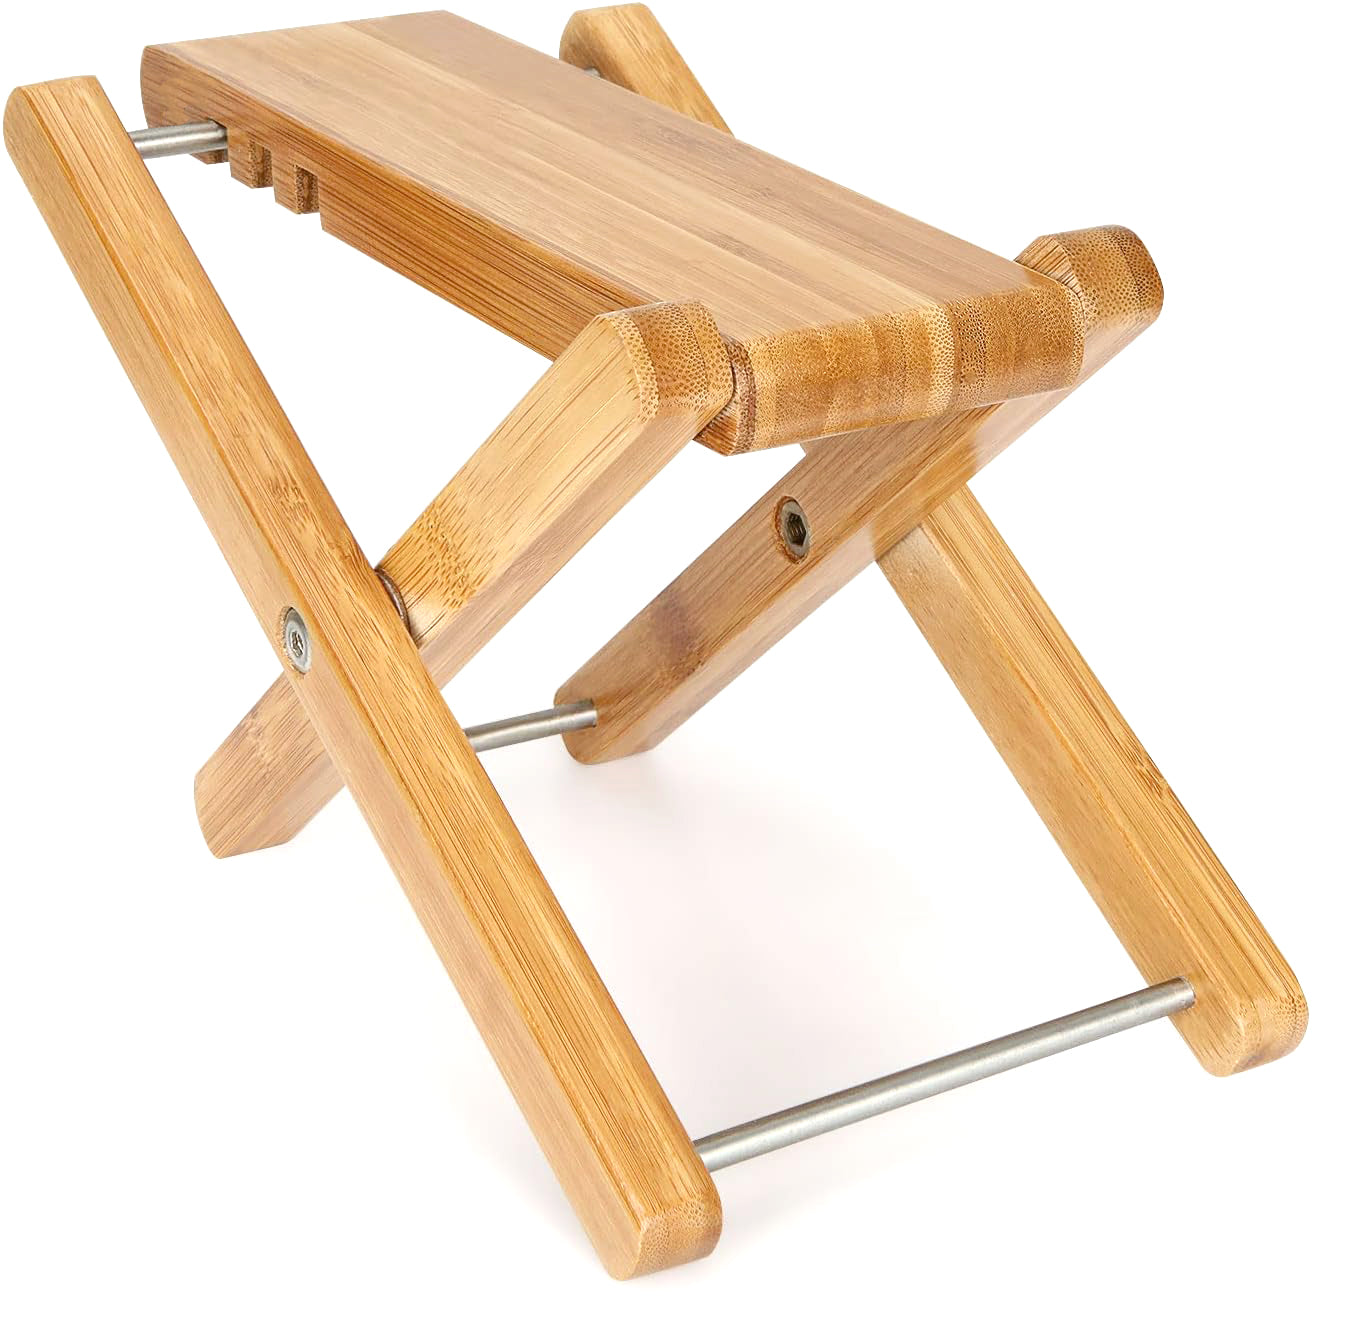 5 Core Guitar Foot Rest Wooden Bamboo Foldable Height Adjustable 4.5" up to 8" Non-Slip Foot Stand